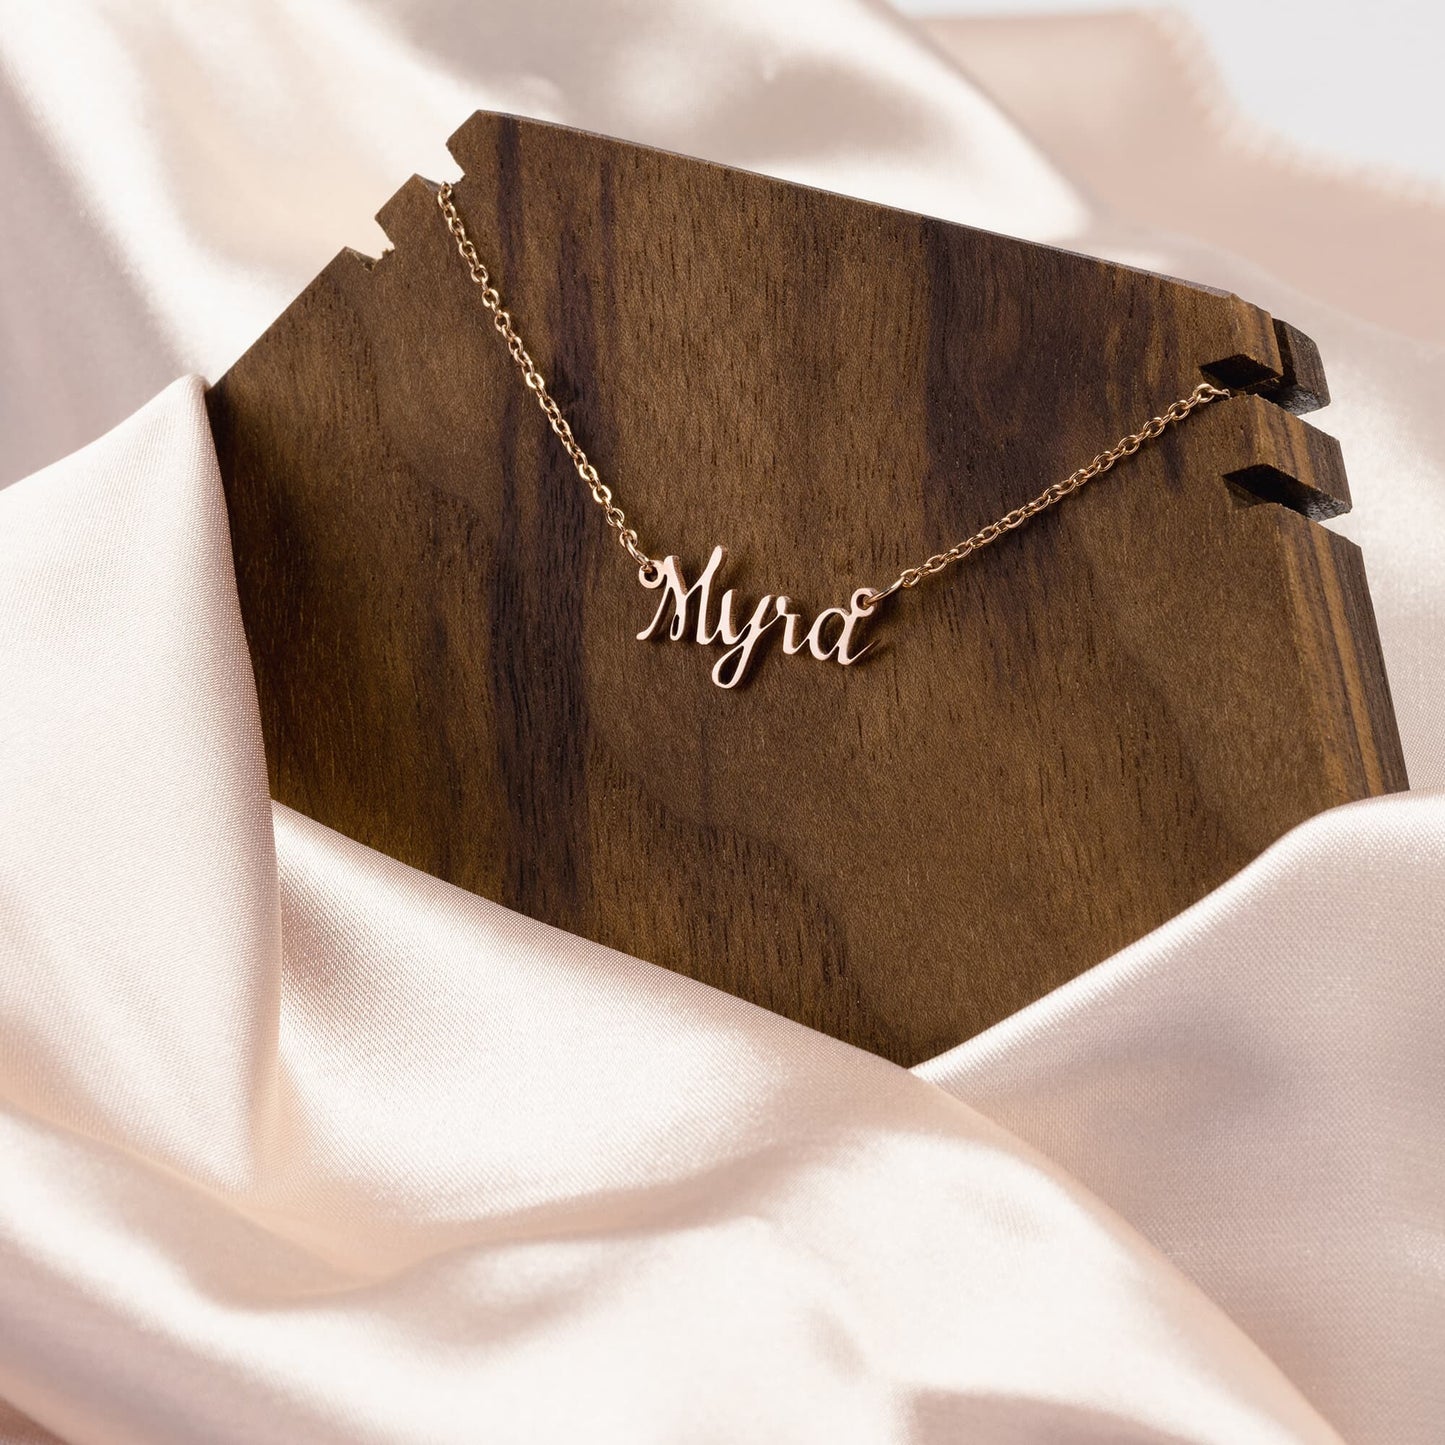 Personalize Name Necklace for Mom, Wife, Sister Cute